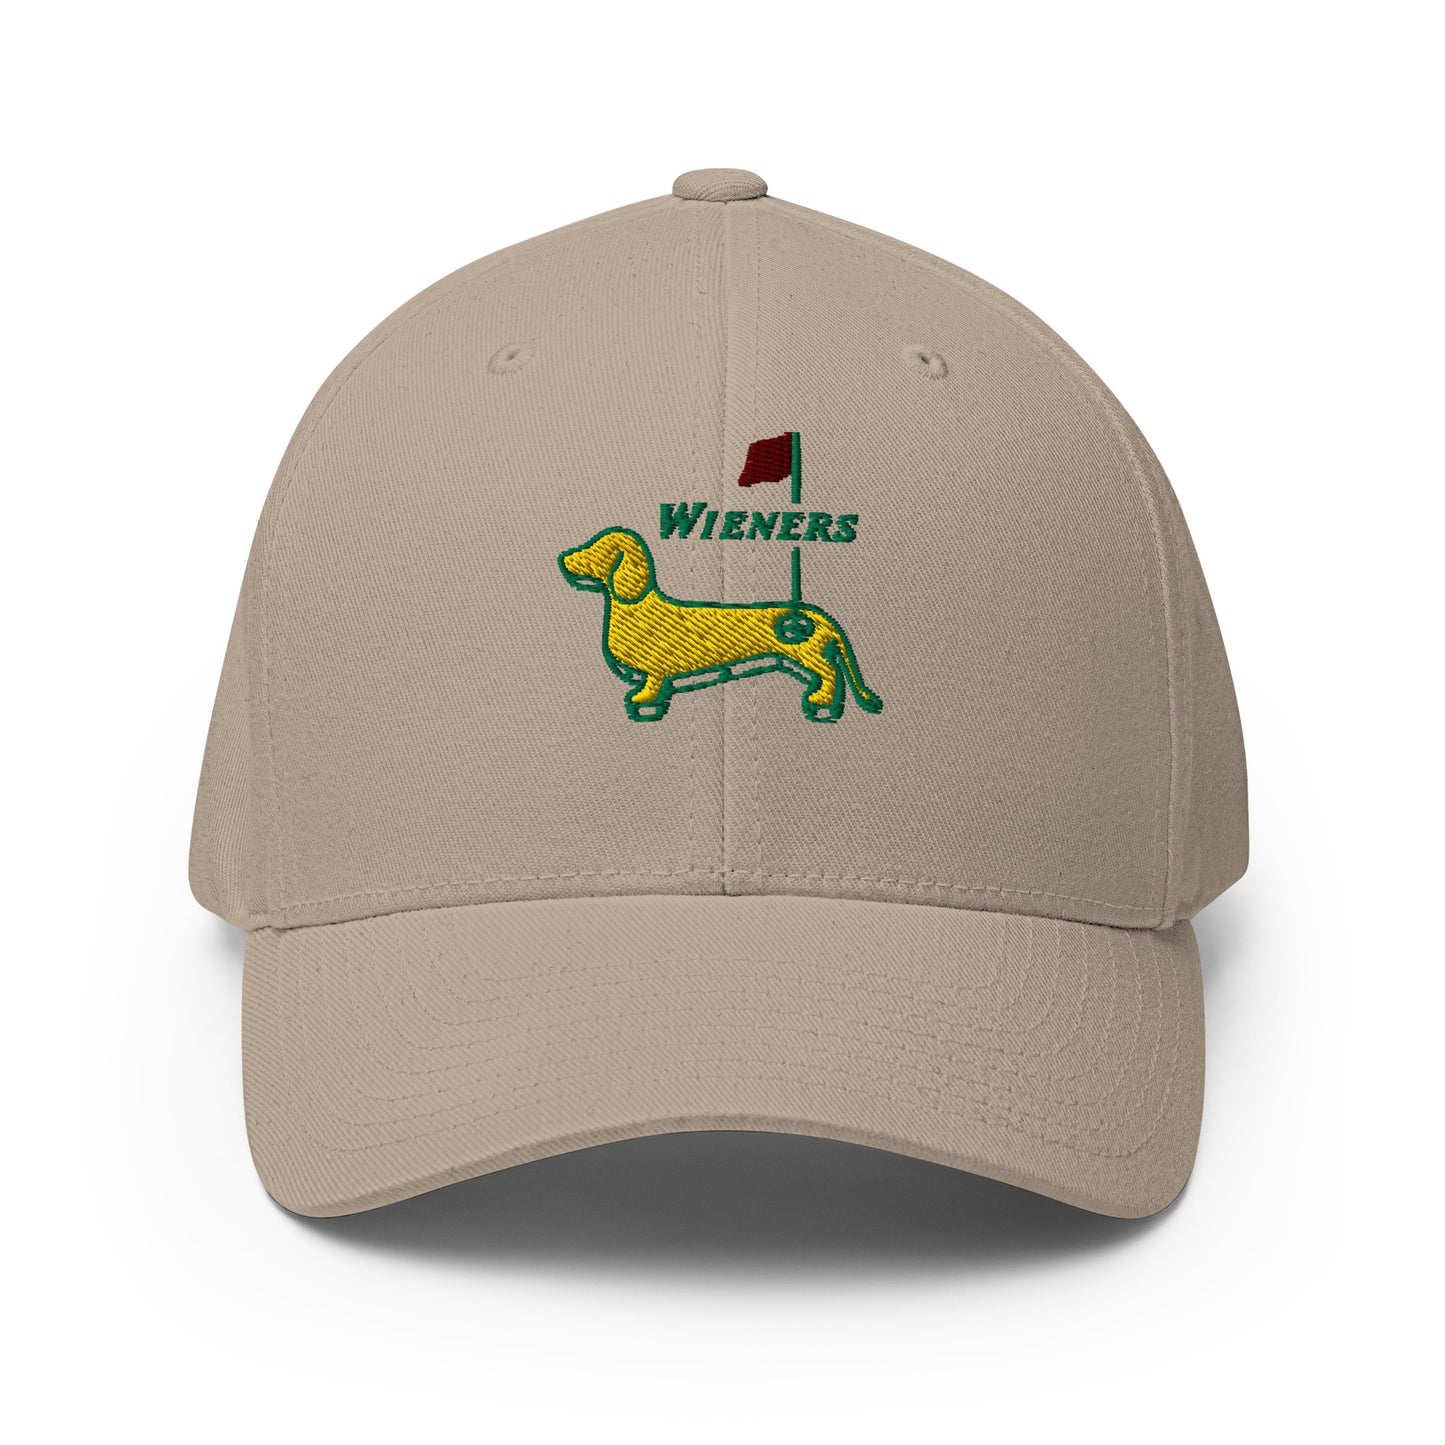 FlexFit Embroidered Hat - WEENS ON THE GREENS